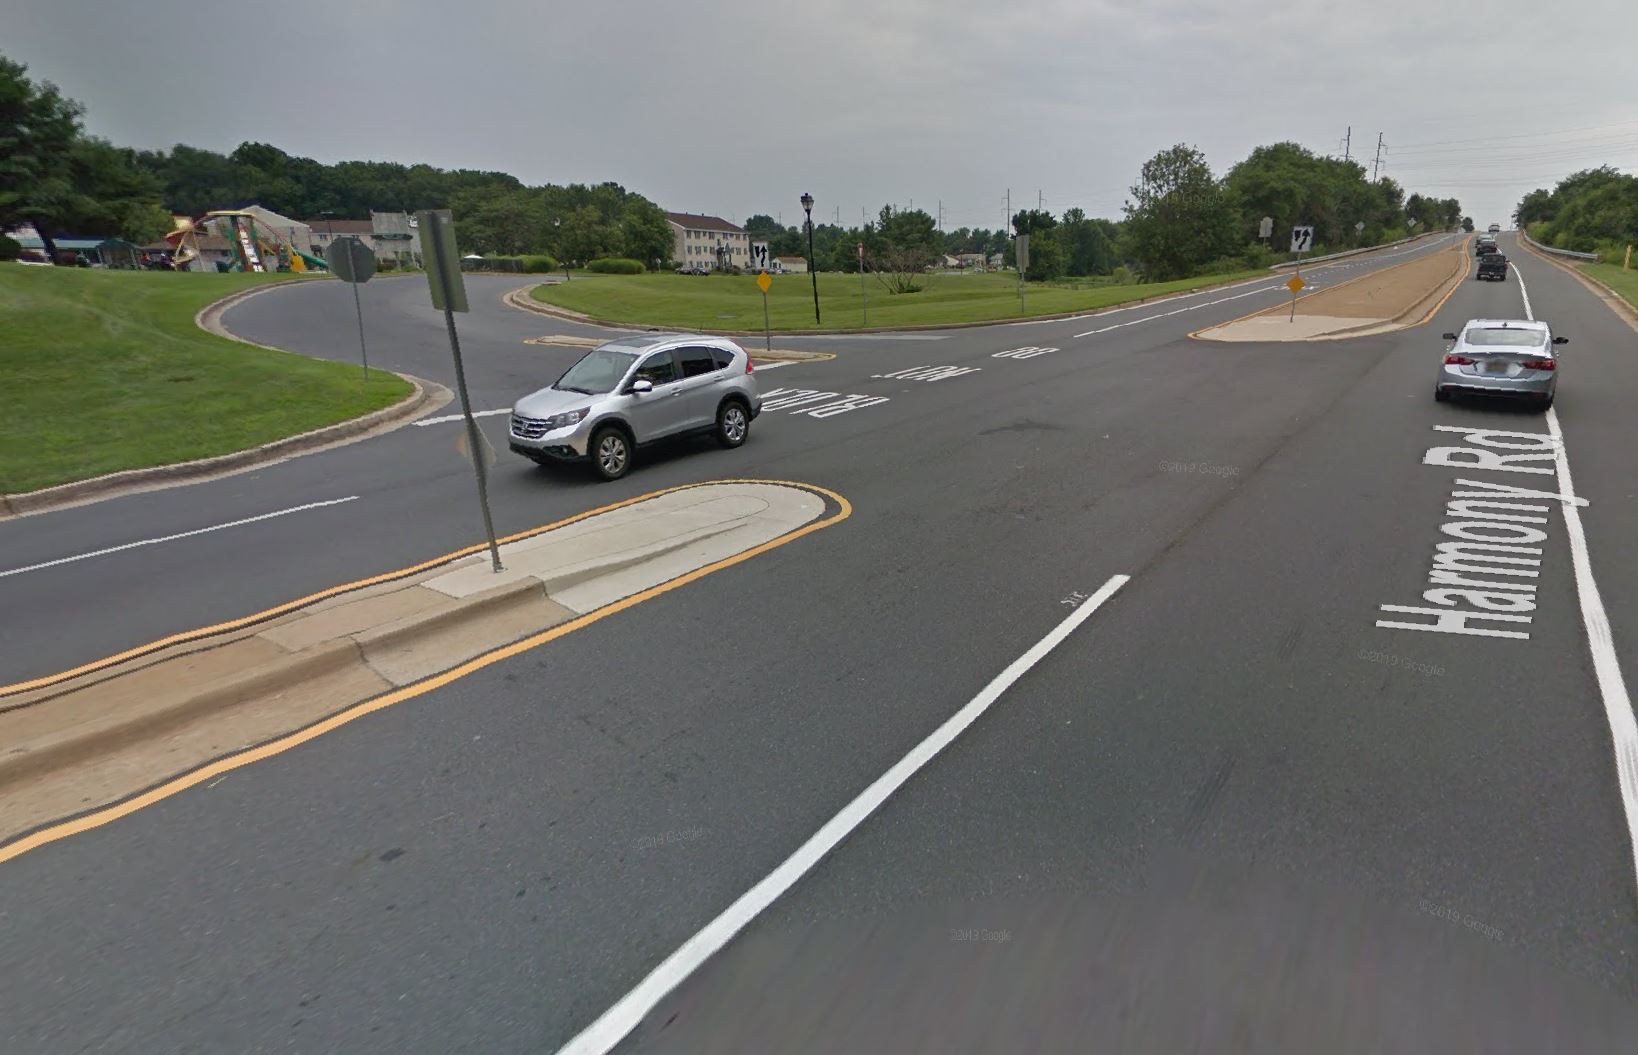 Google map image of Harmony Road and Harmony Crest Road